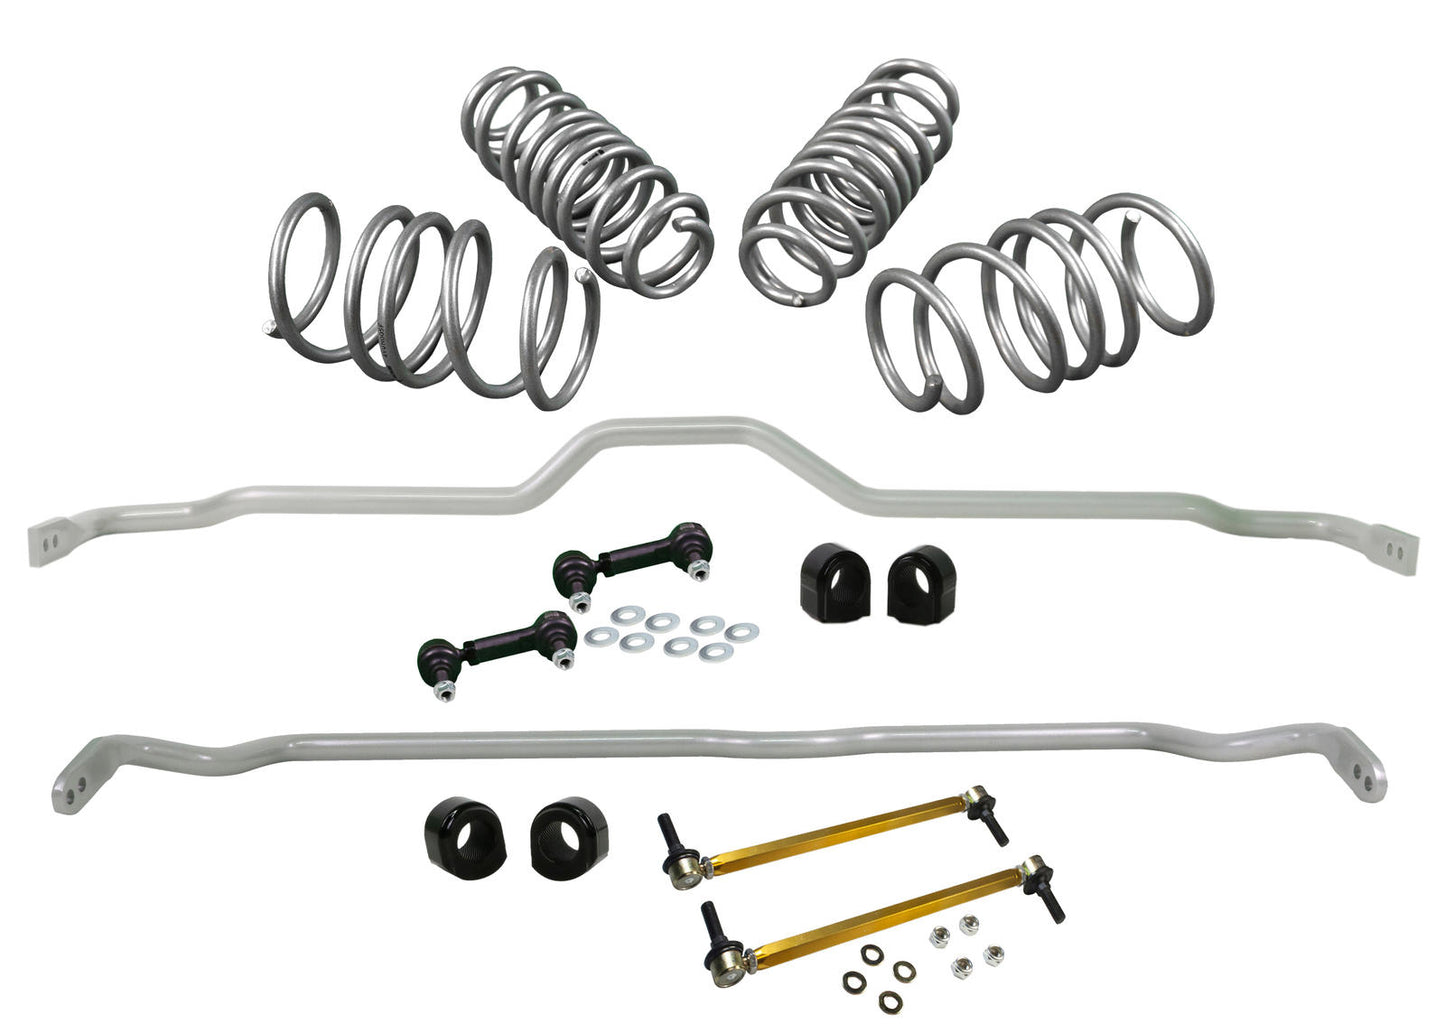 Grip Series 1 Anti-Roll Bar And Lowering Spring Vehicle Kit Mercedes A45 AMG W176 2013-2019